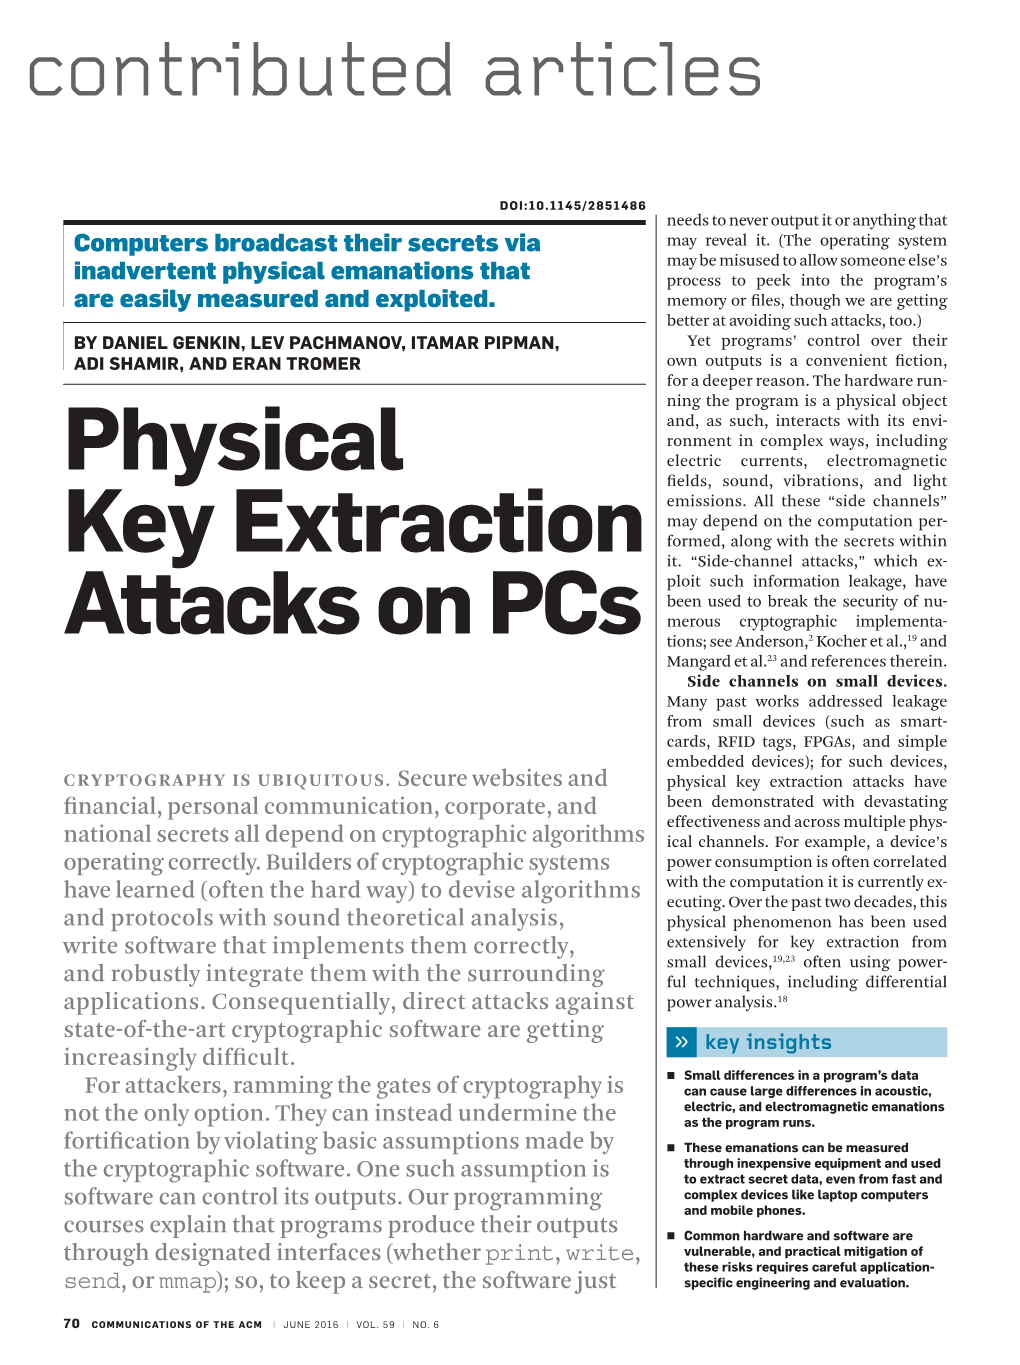 Physical Key Extraction Attacks On